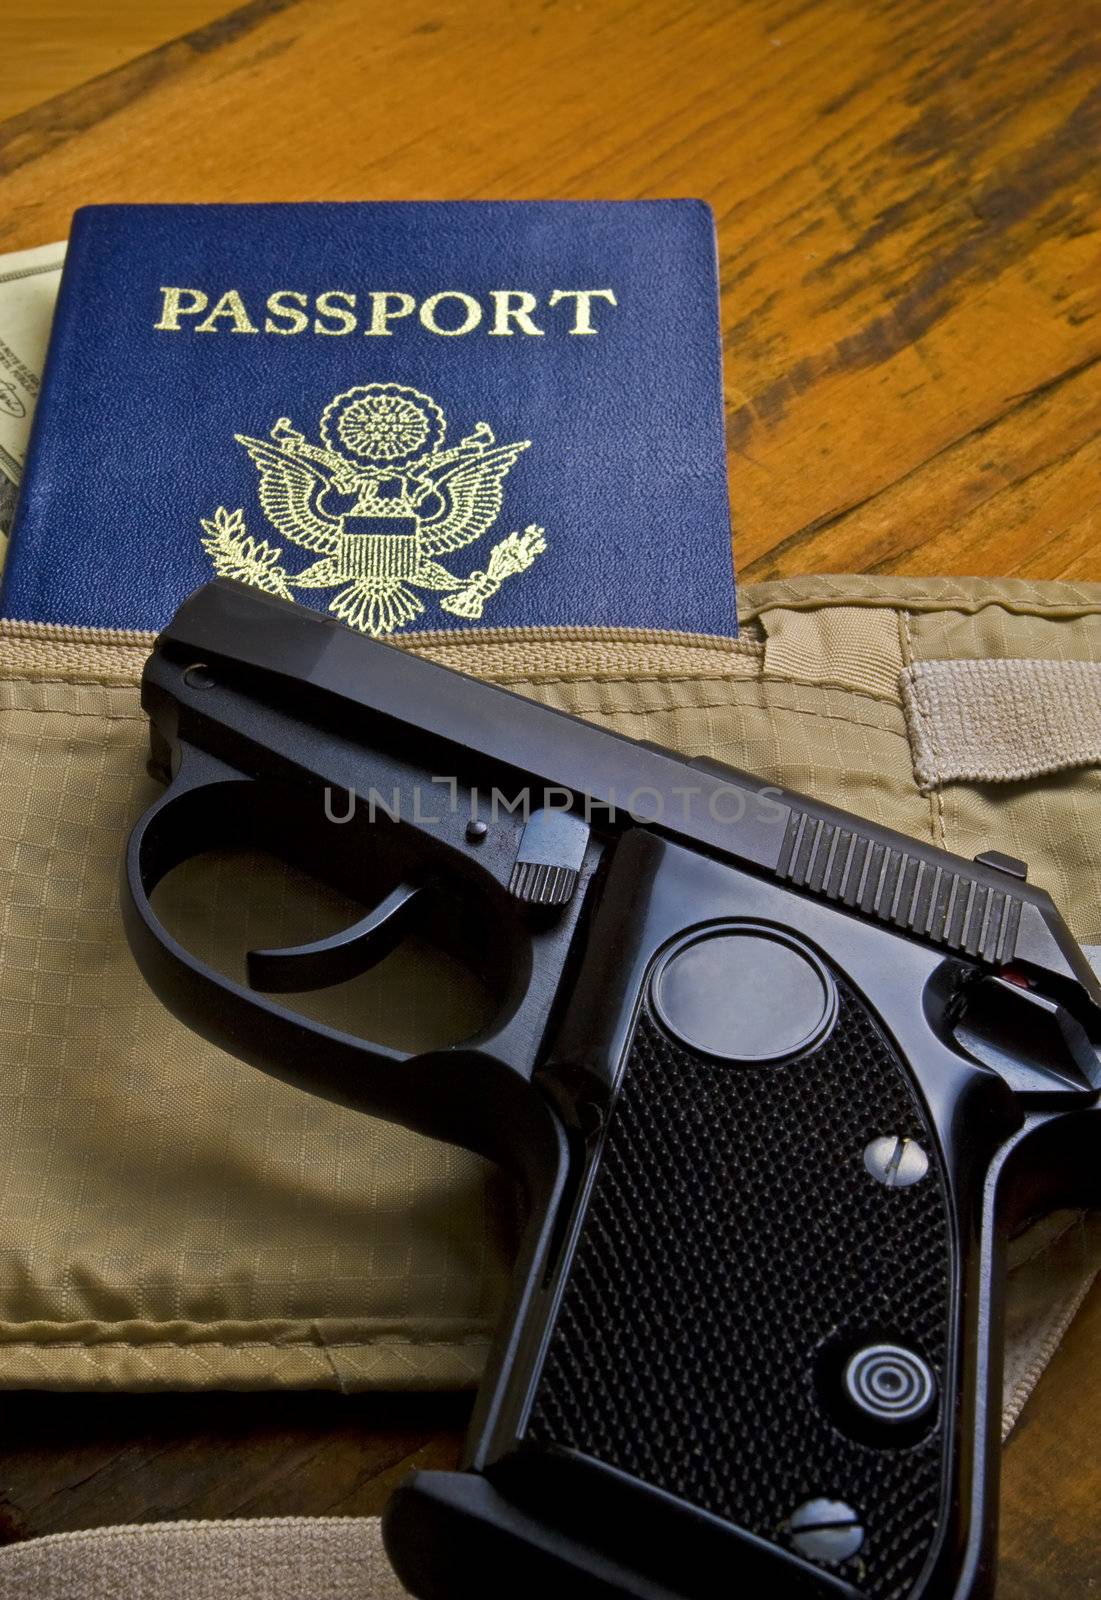 Pistol and Passport by Geoarts